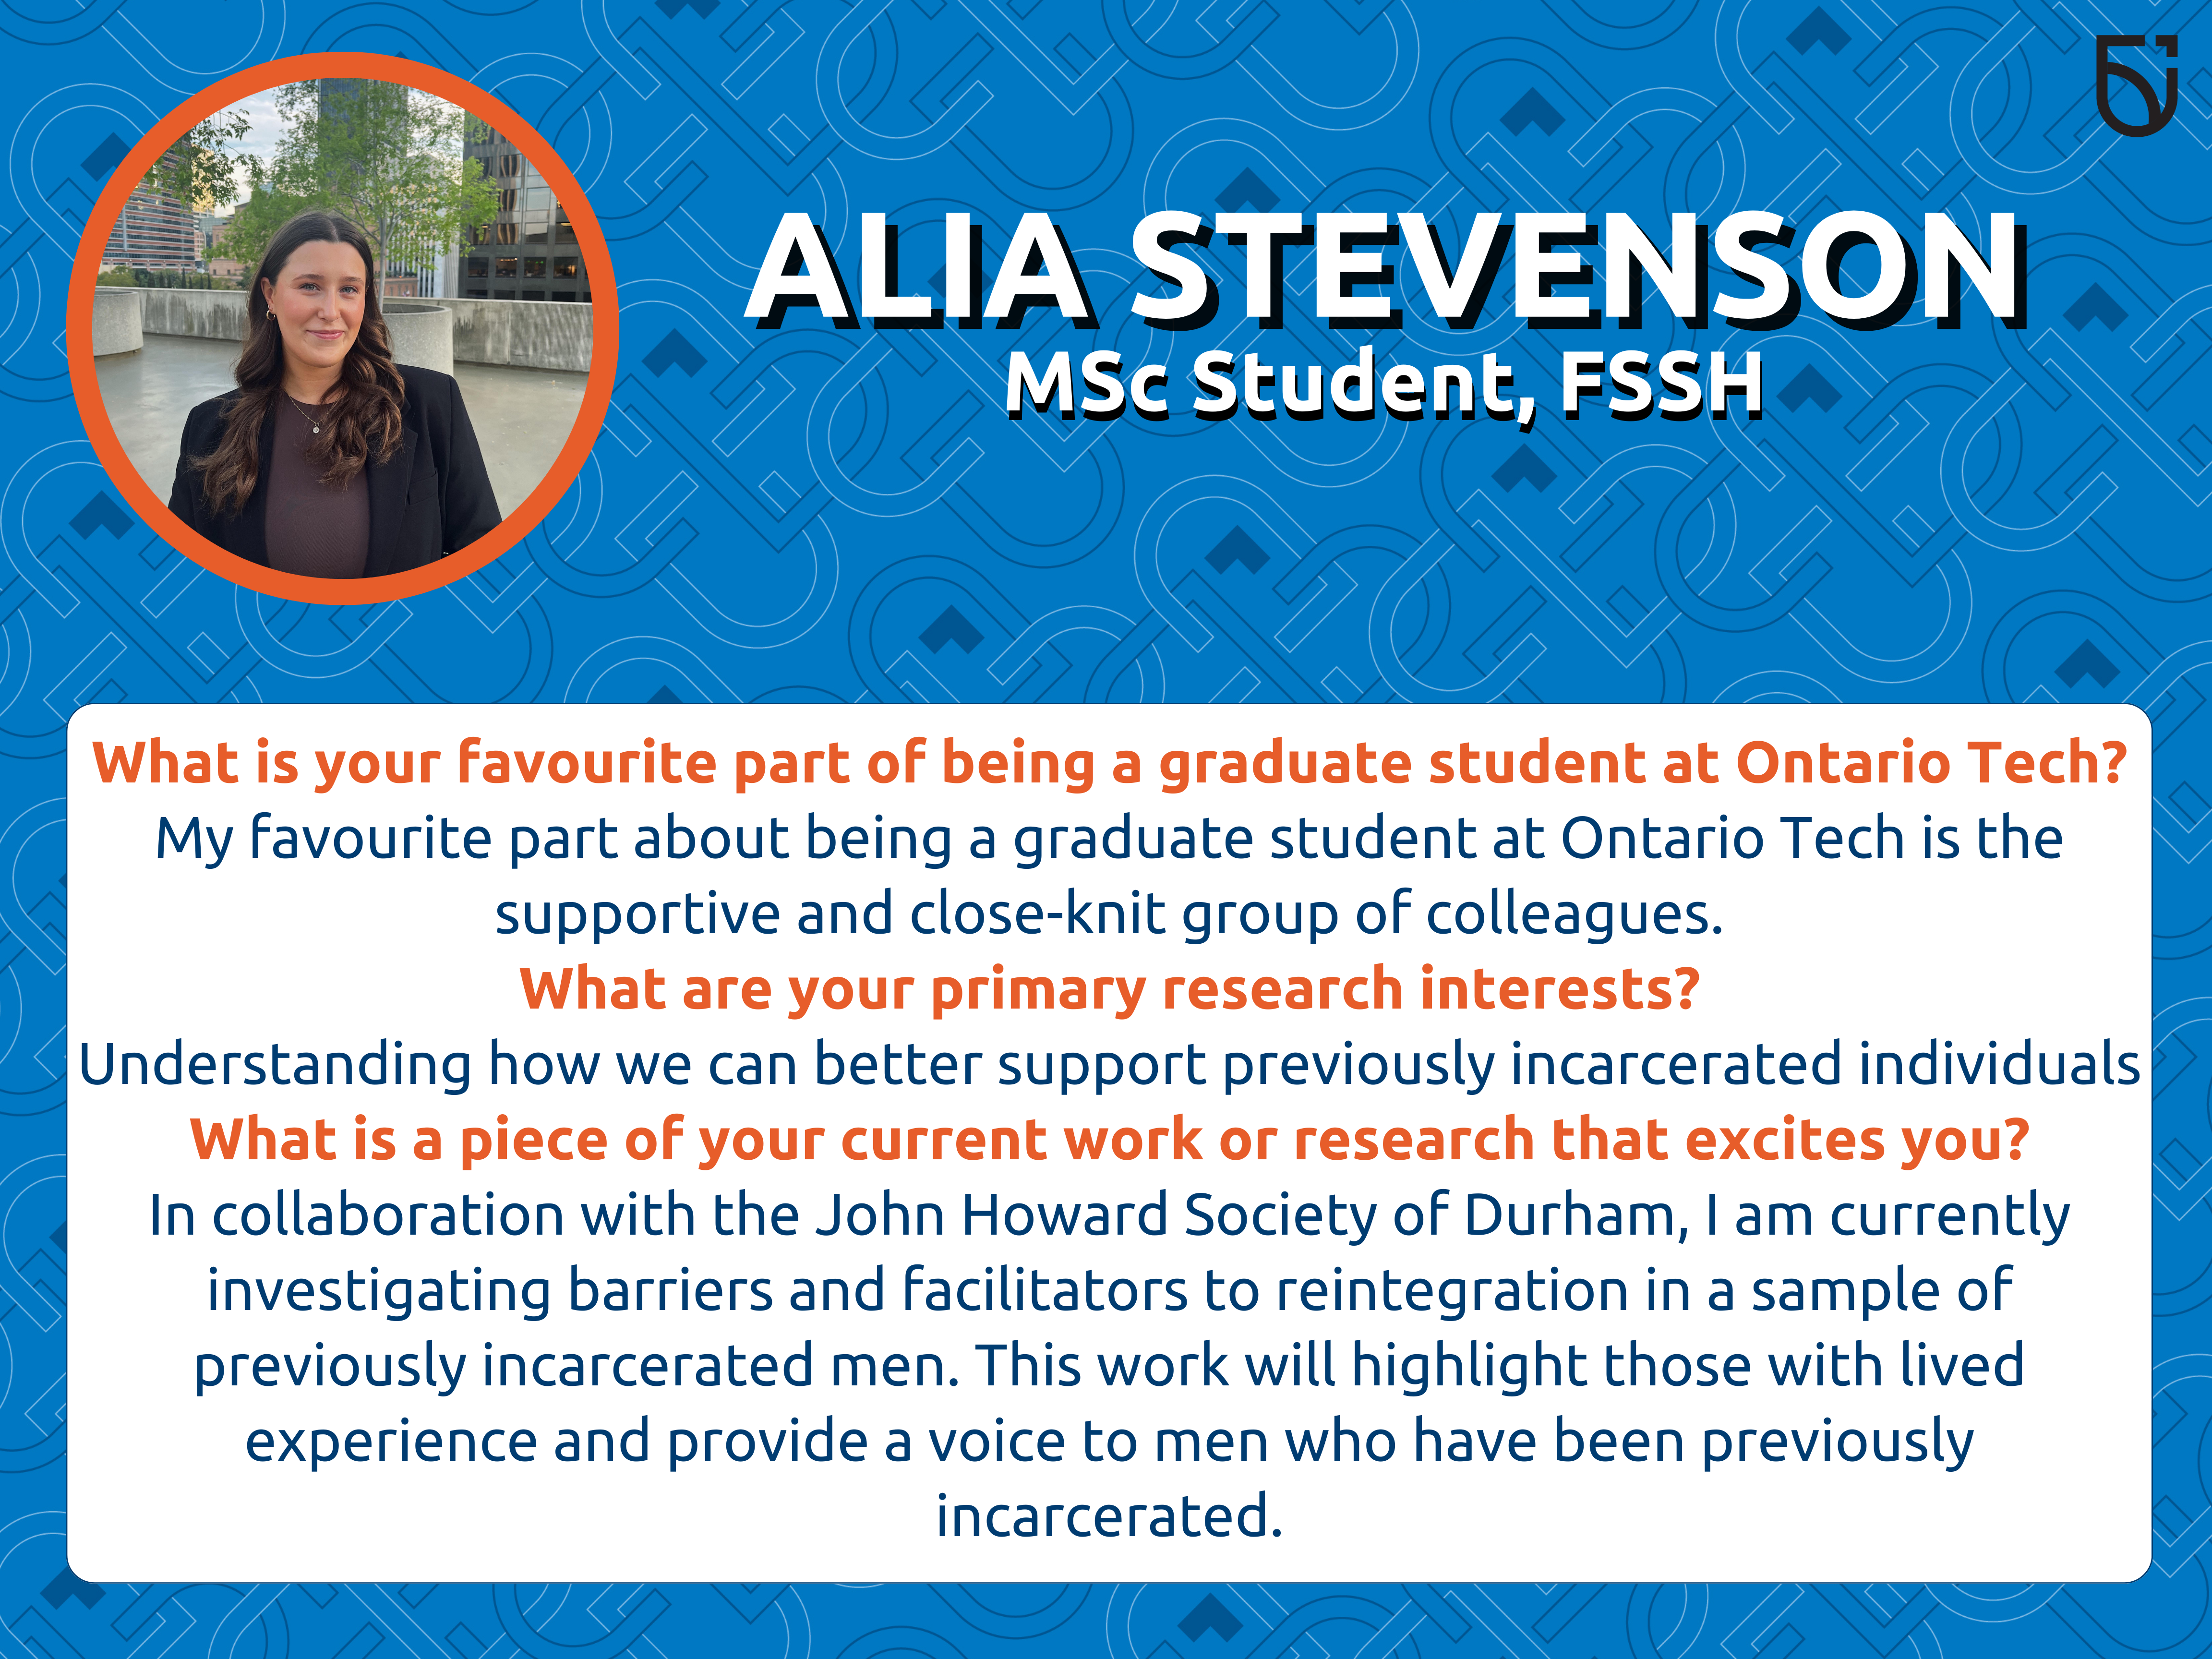 This photo is a Women’s Wednesday feature of Alia Stevenson, a Master’s student in the Faculty of Social Science and Humanities.